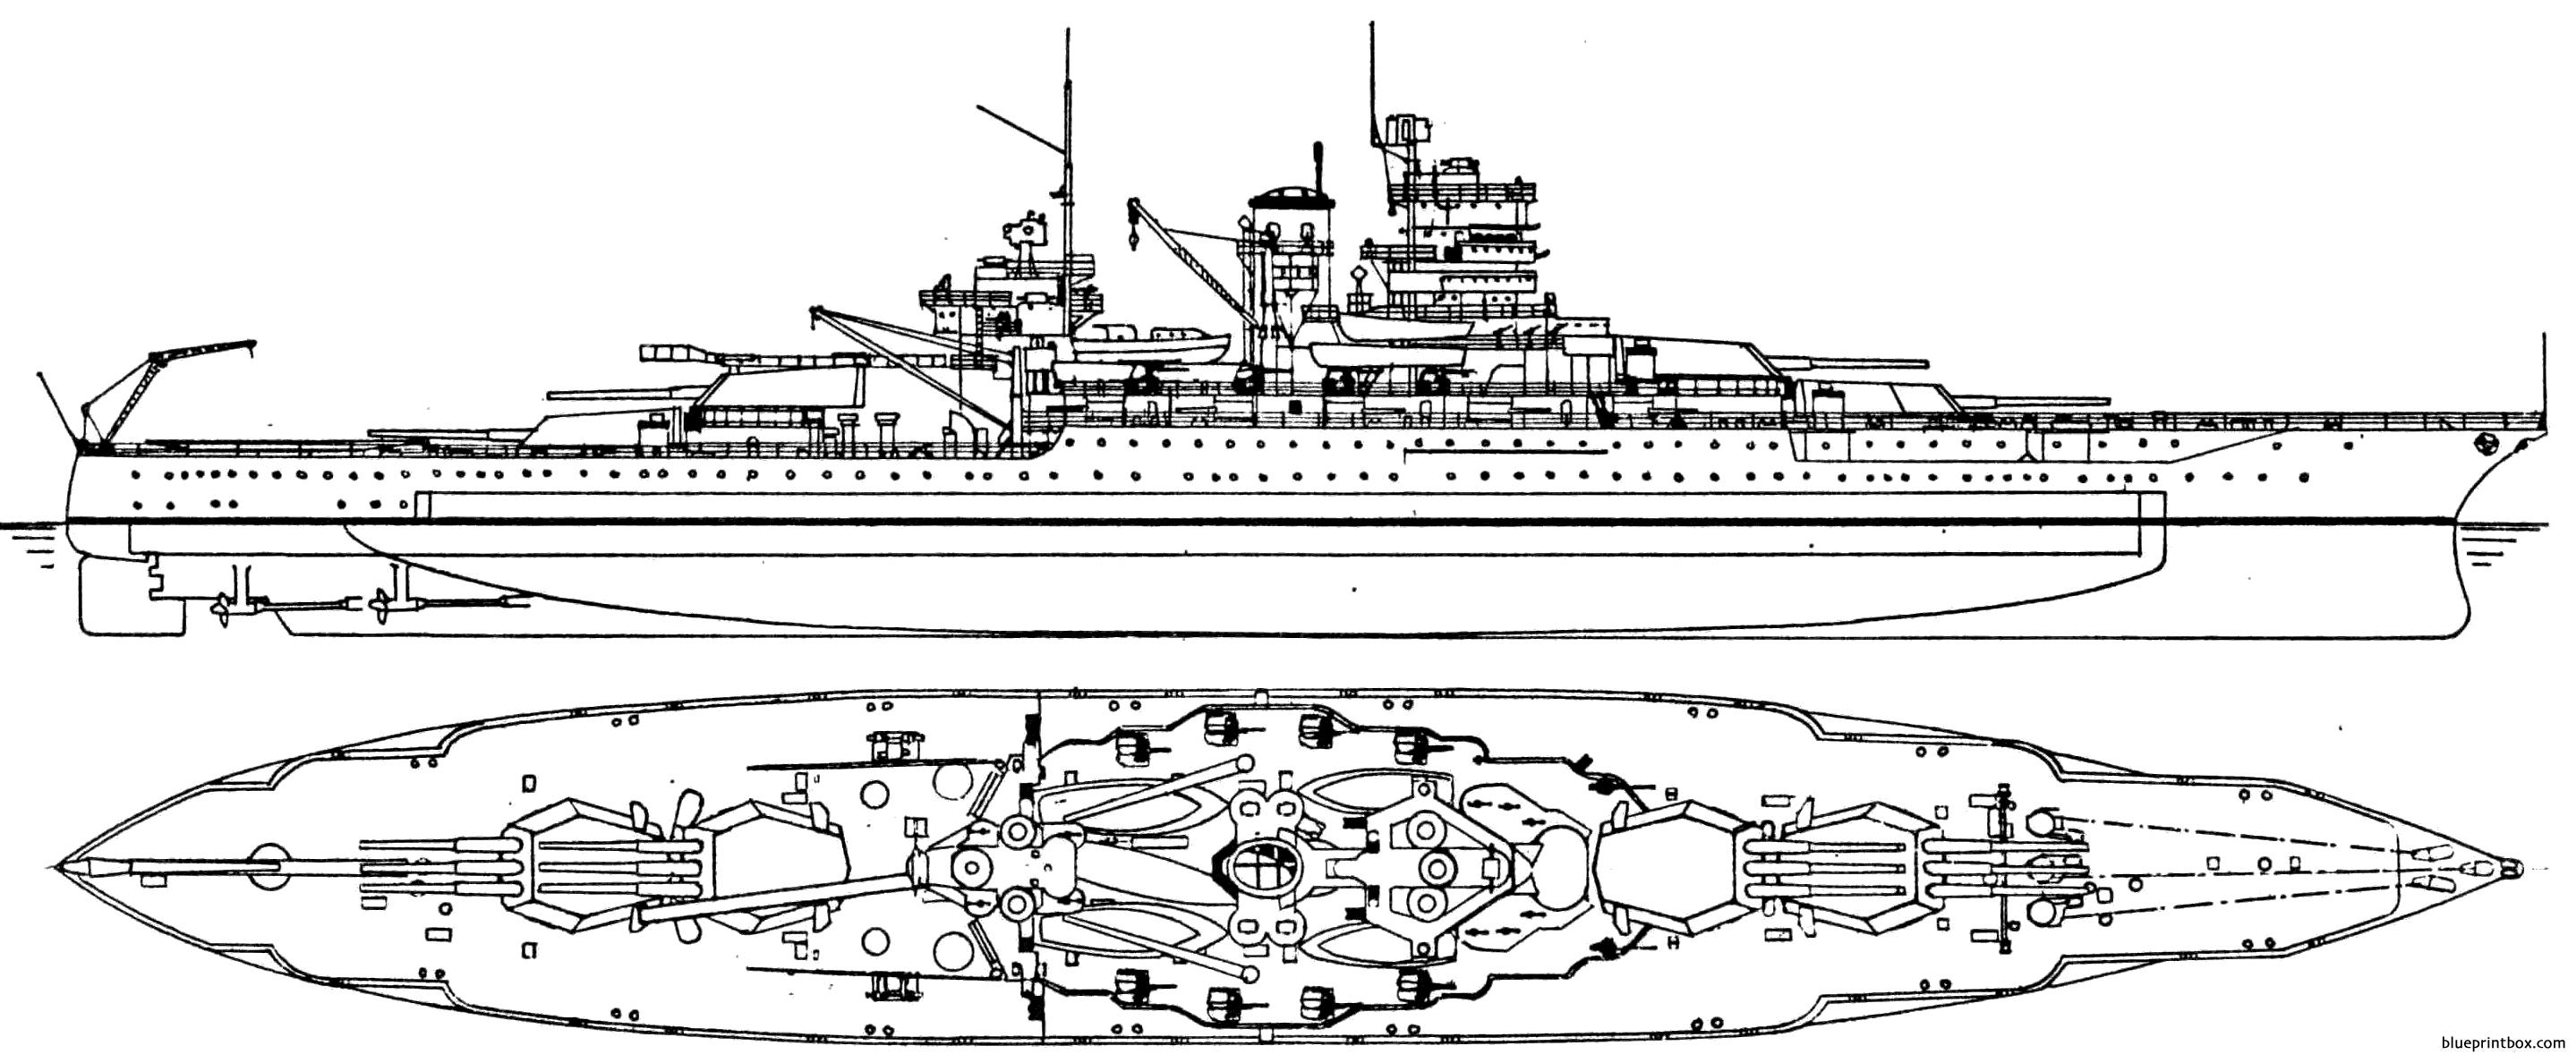 bb 40 uss new mexico1944 - BlueprintBox.com - Free Plans and Blueprints of Cars, Trailers, Ships ...